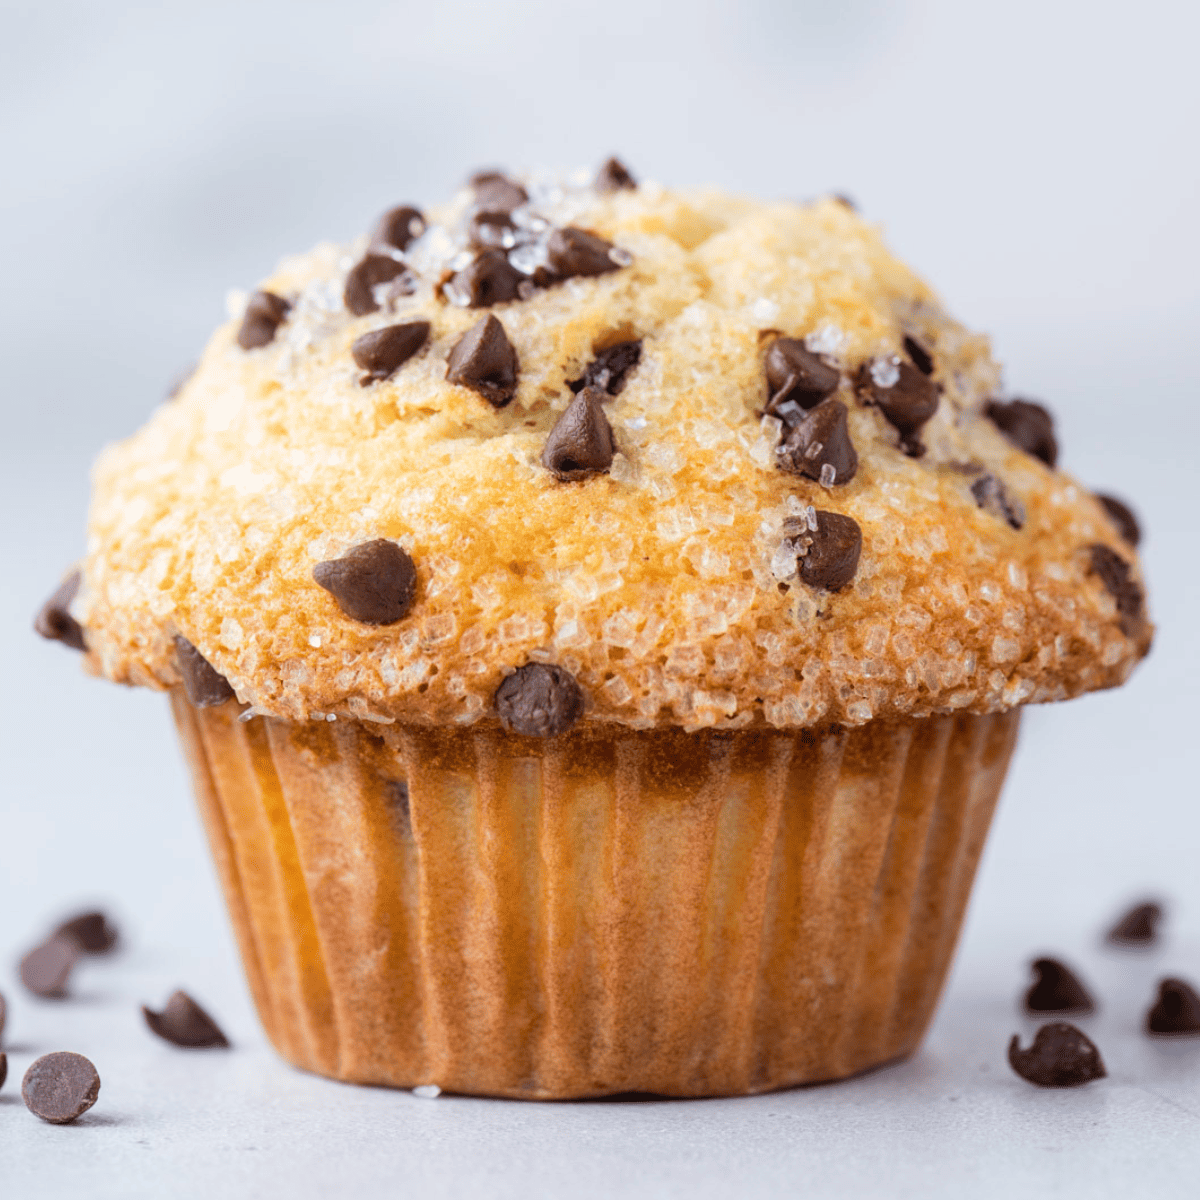 Big Bakery Style Chocolate Chip Muffins - The First Year